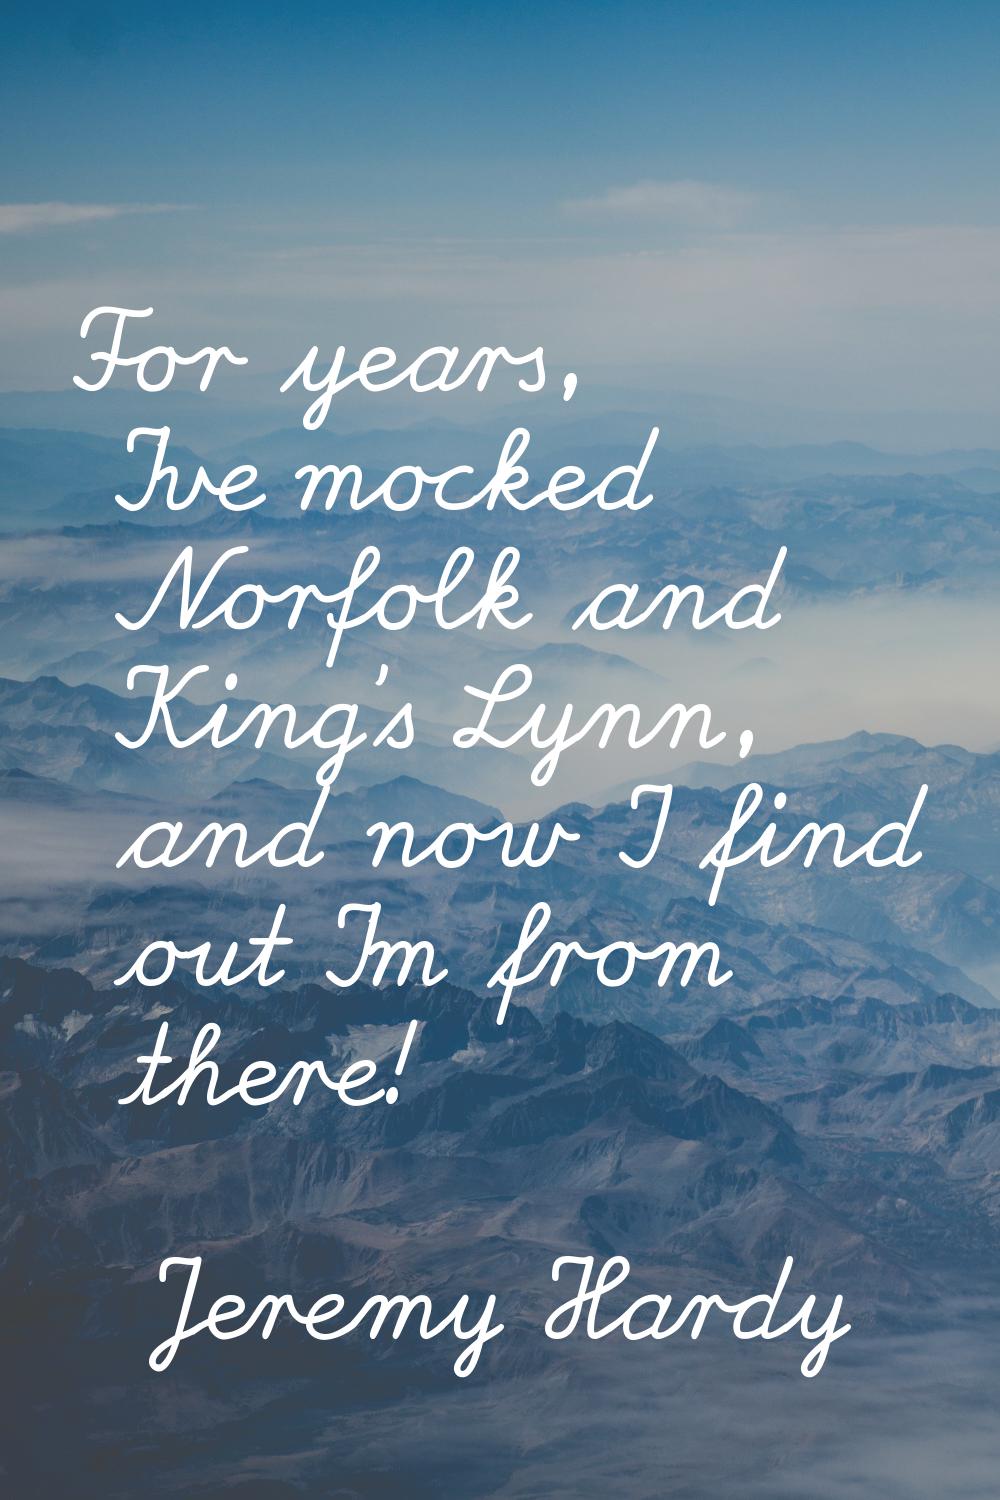 For years, I've mocked Norfolk and King's Lynn, and now I find out I'm from there!